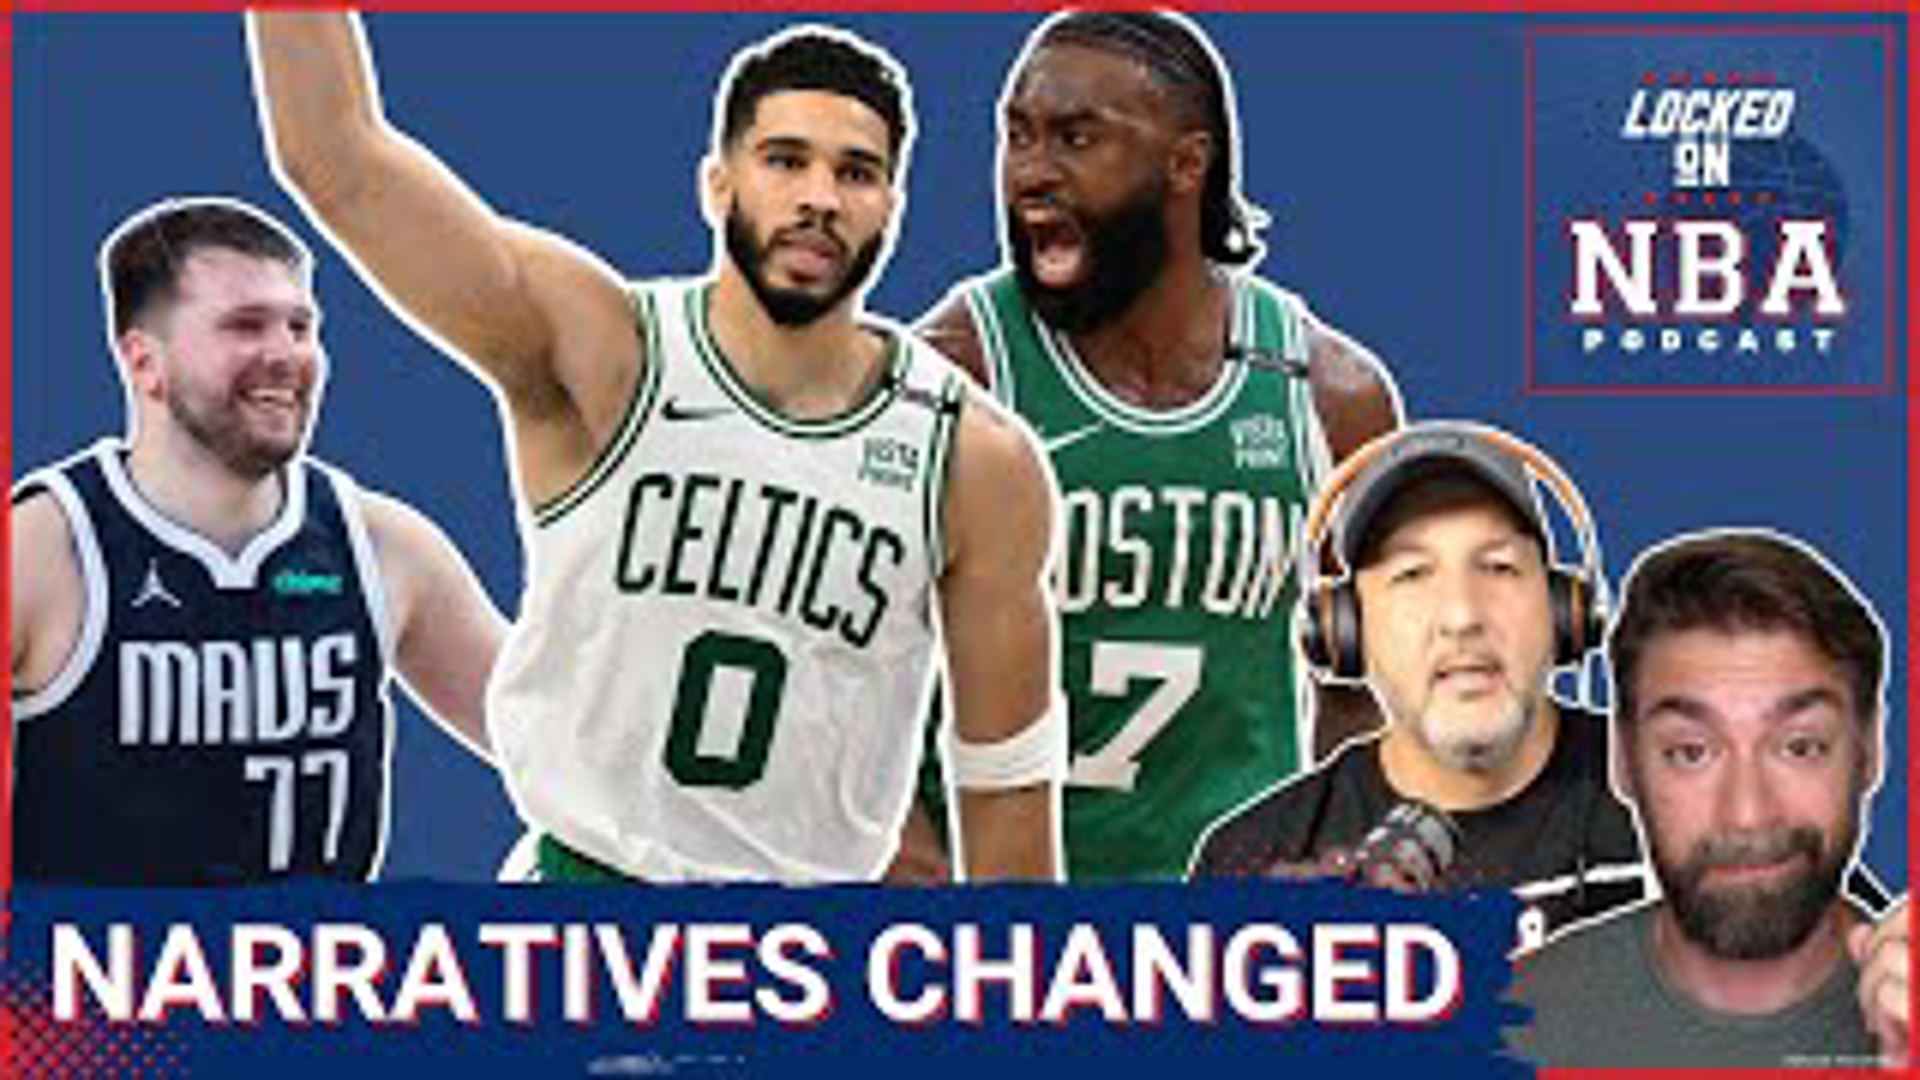 After winning the NBA Finals with the Boston Celtics, Jayson Tatum and Jaylen Brown changed the narrative around their careers.